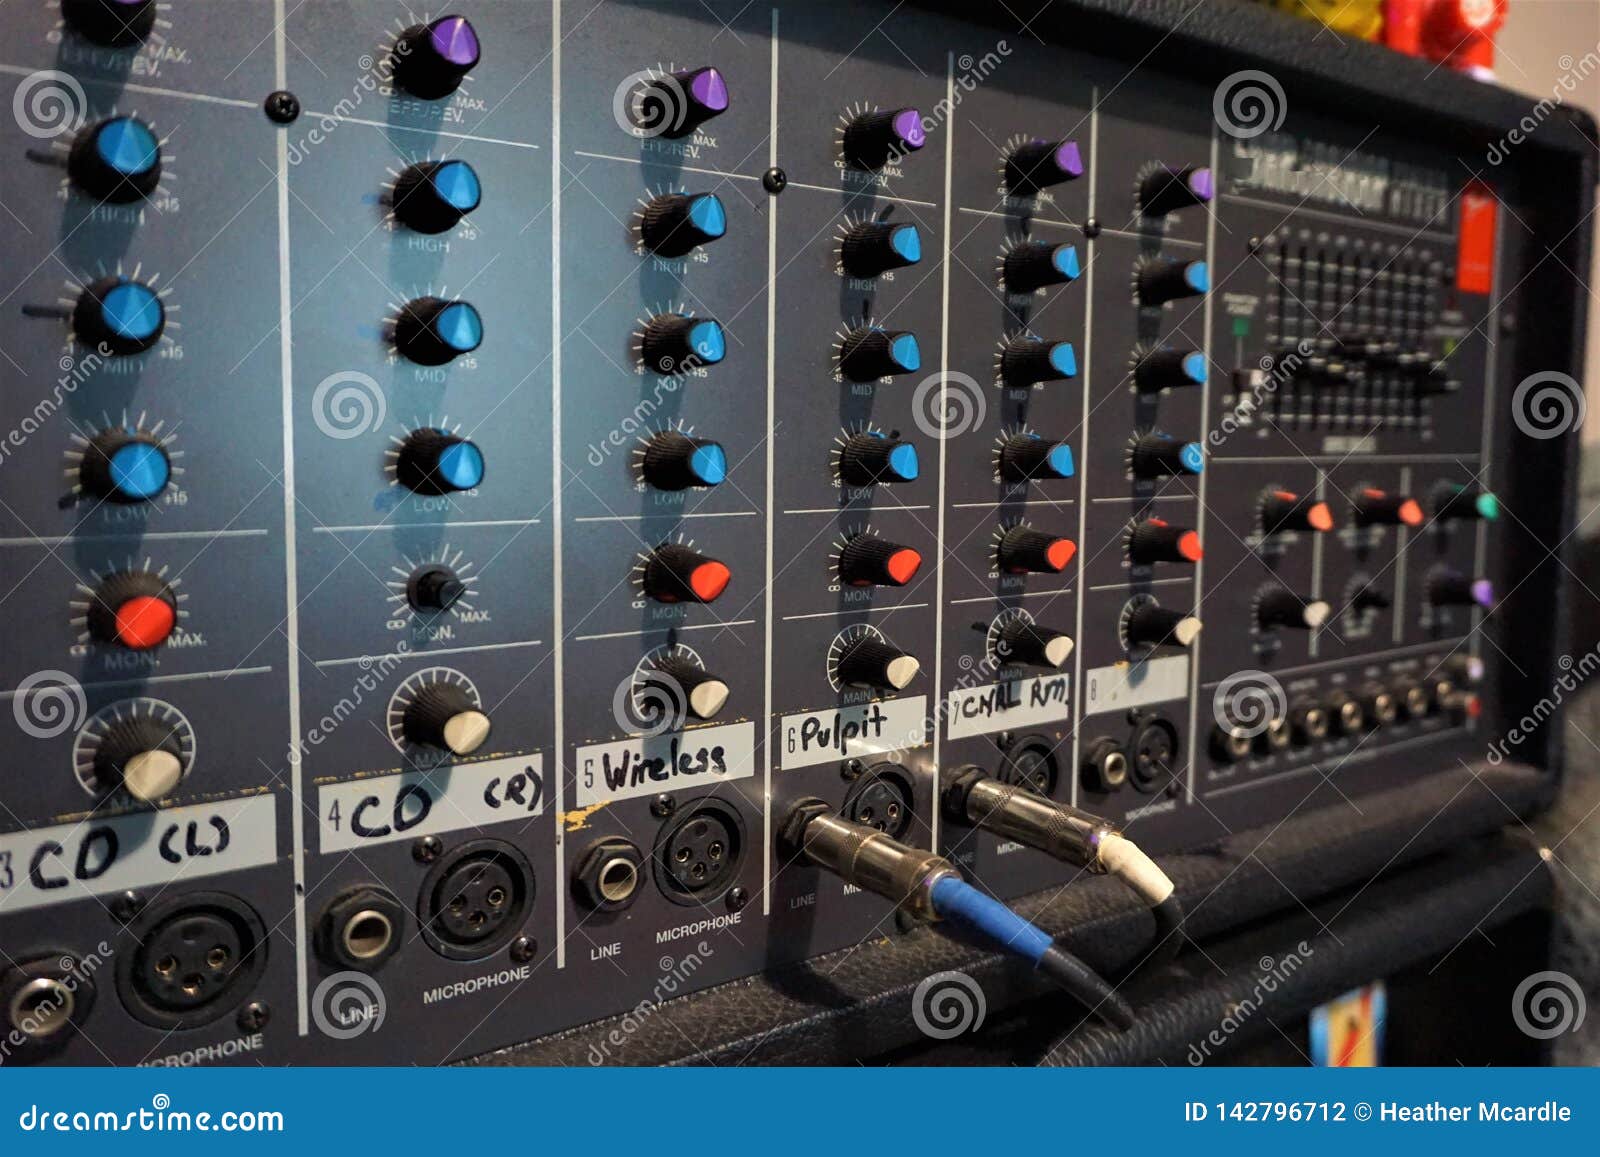 Retro Electronic Sound System Stock Photo - Image of dials, backdrop